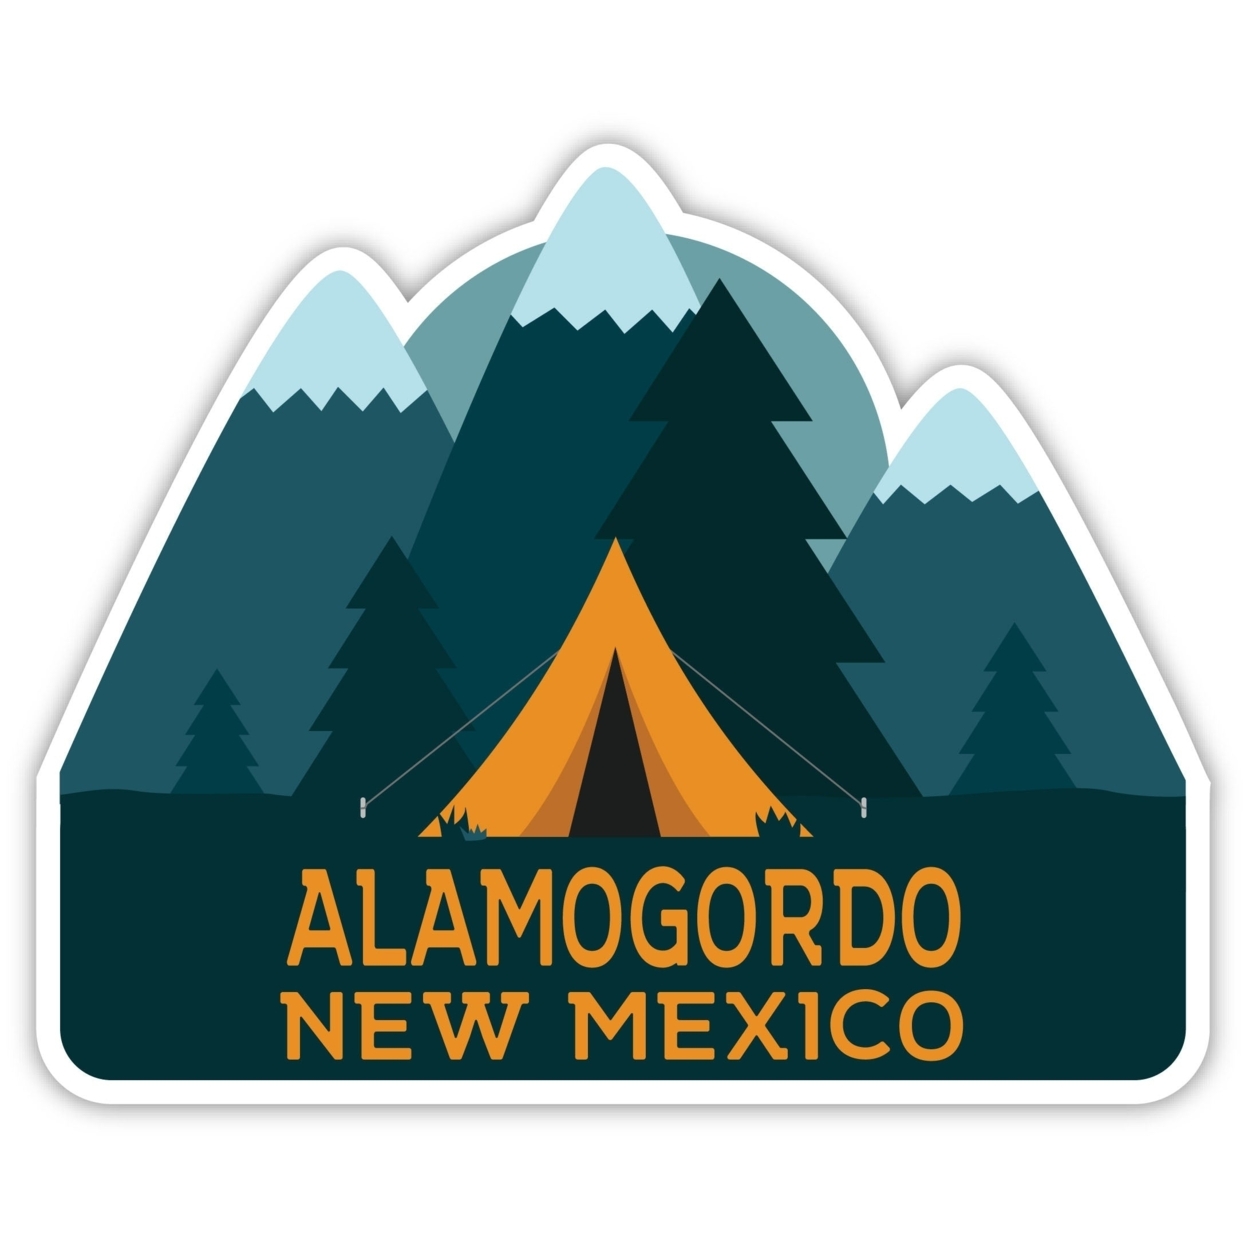 Alamogordo New Mexico Souvenir Decorative Stickers (Choose Theme And Size) - 4-Pack, 8-Inch, Camp Life